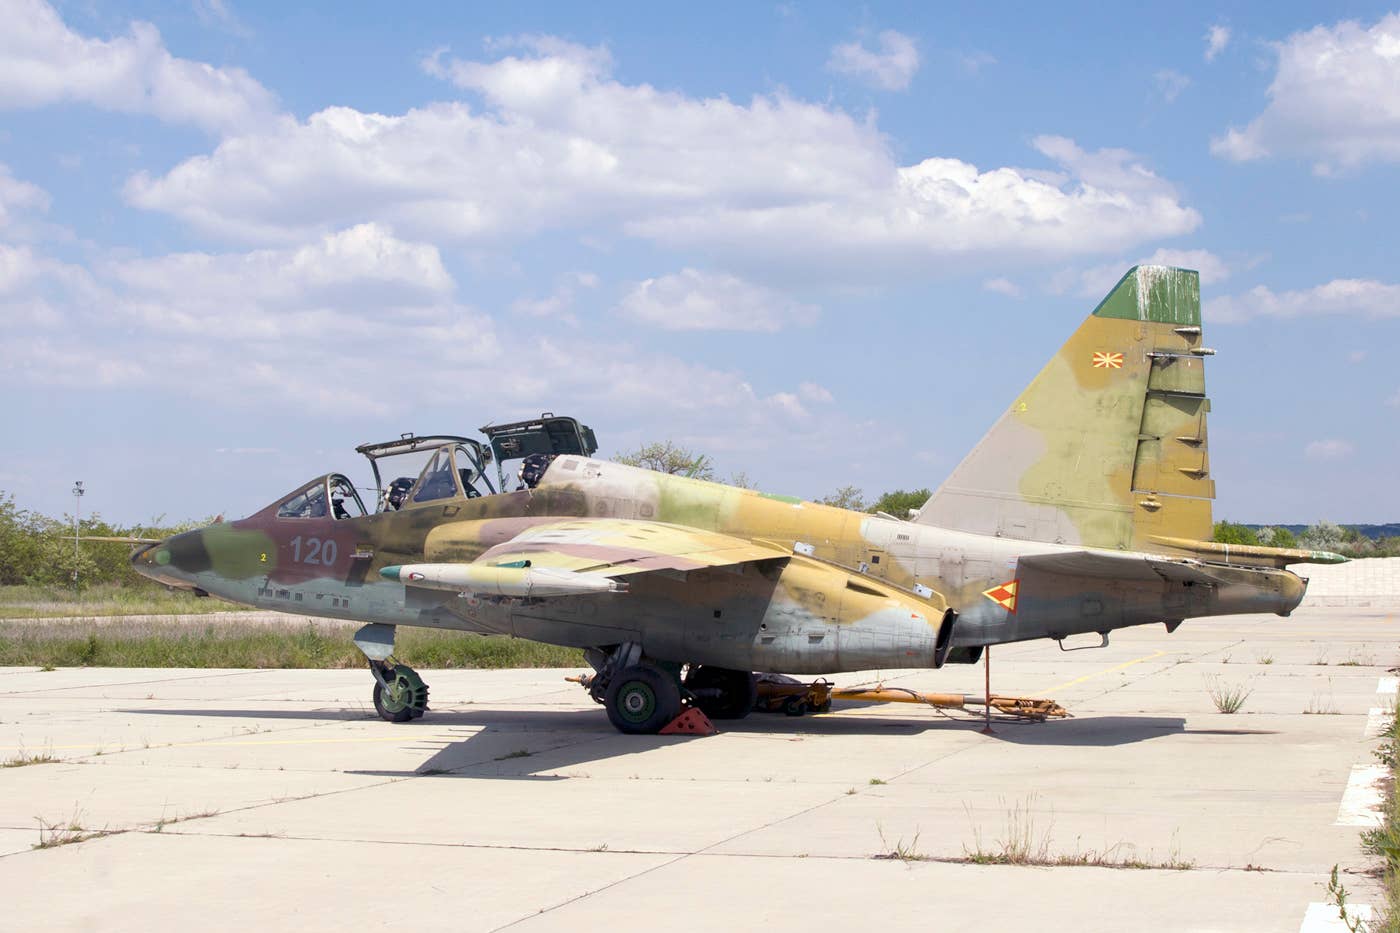 A Su-25 used by the North Macedonian Air Force grounded on Petrovec Airbase. <em>Credit: Rob Schleiffert/Wikimedia Commons</em>